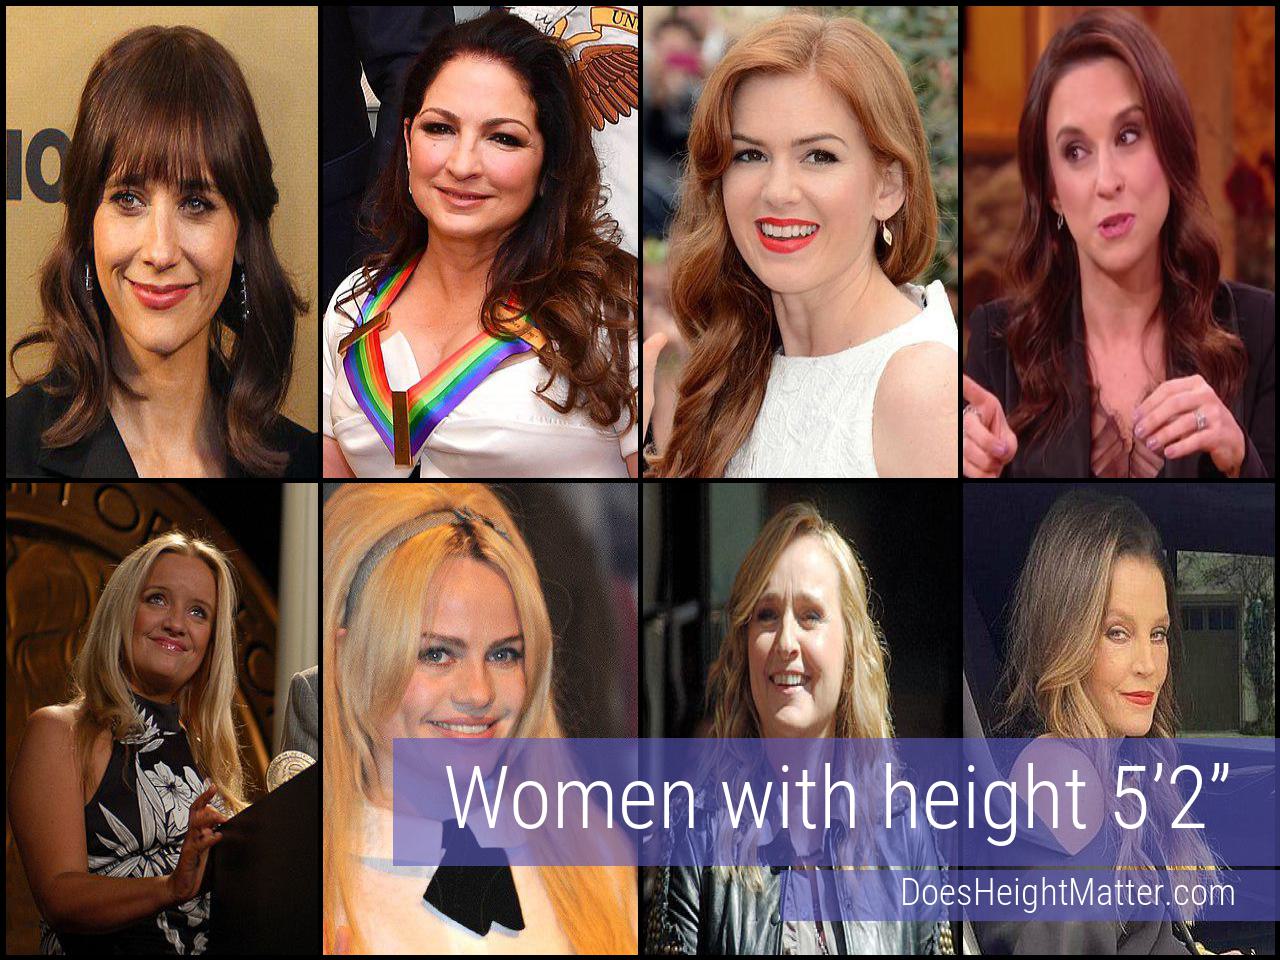 Female celebrities who are 5'2